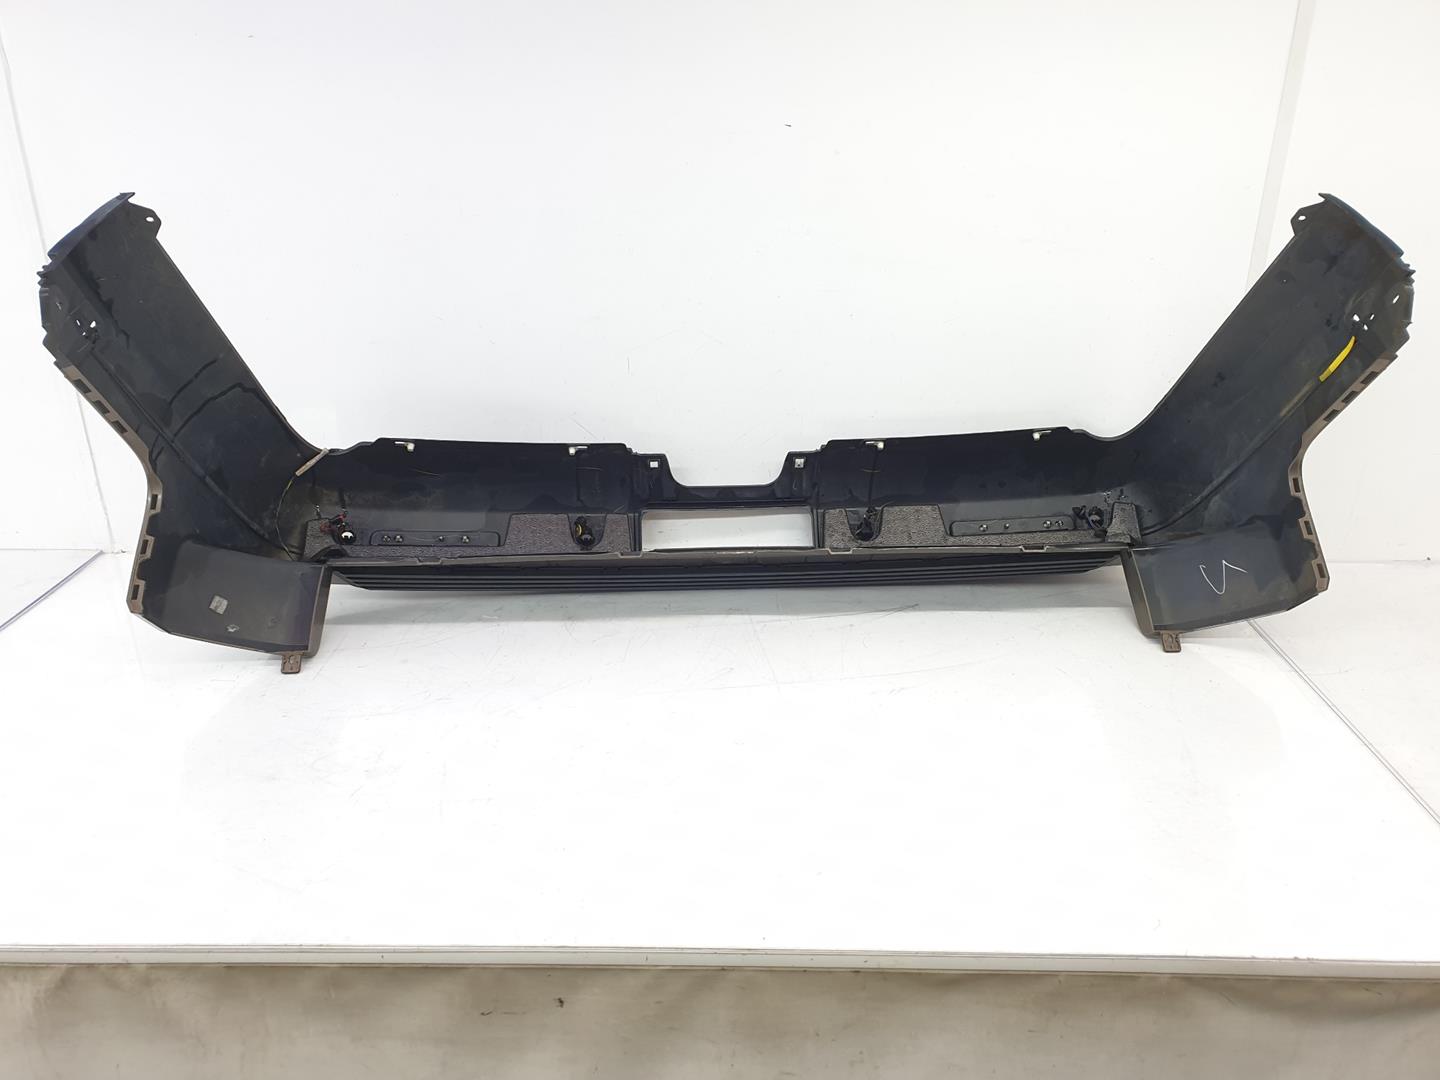 LAND ROVER Discovery 4 generation (2009-2016) Rear Bumper LR015463, AH2217A958AA, COLORBRONCE 24131219